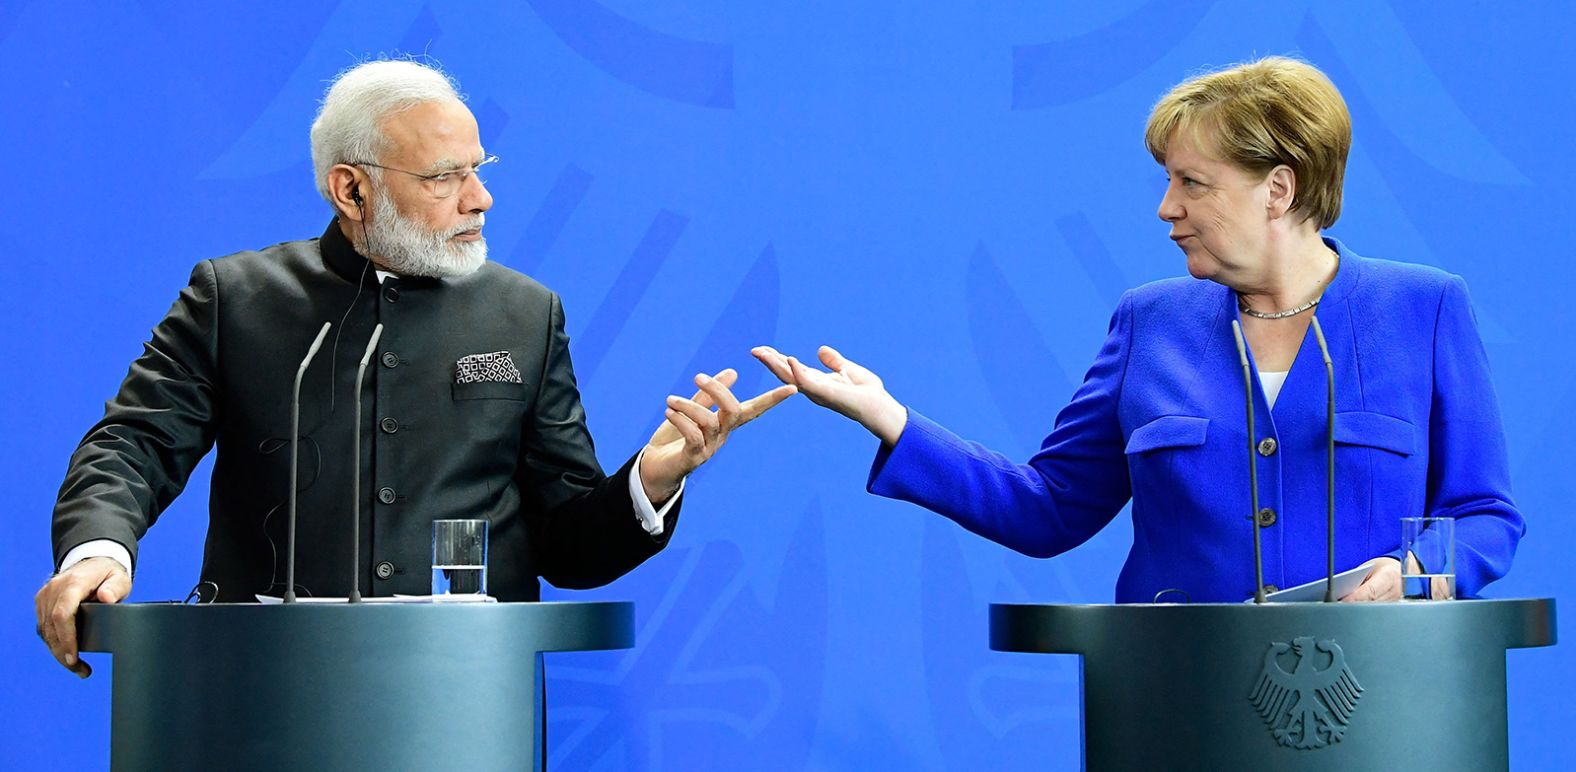 With former German Chancellor Angela Merkel in Berlin, on May 30, 2017. The European Union is India's third largest trading partner.